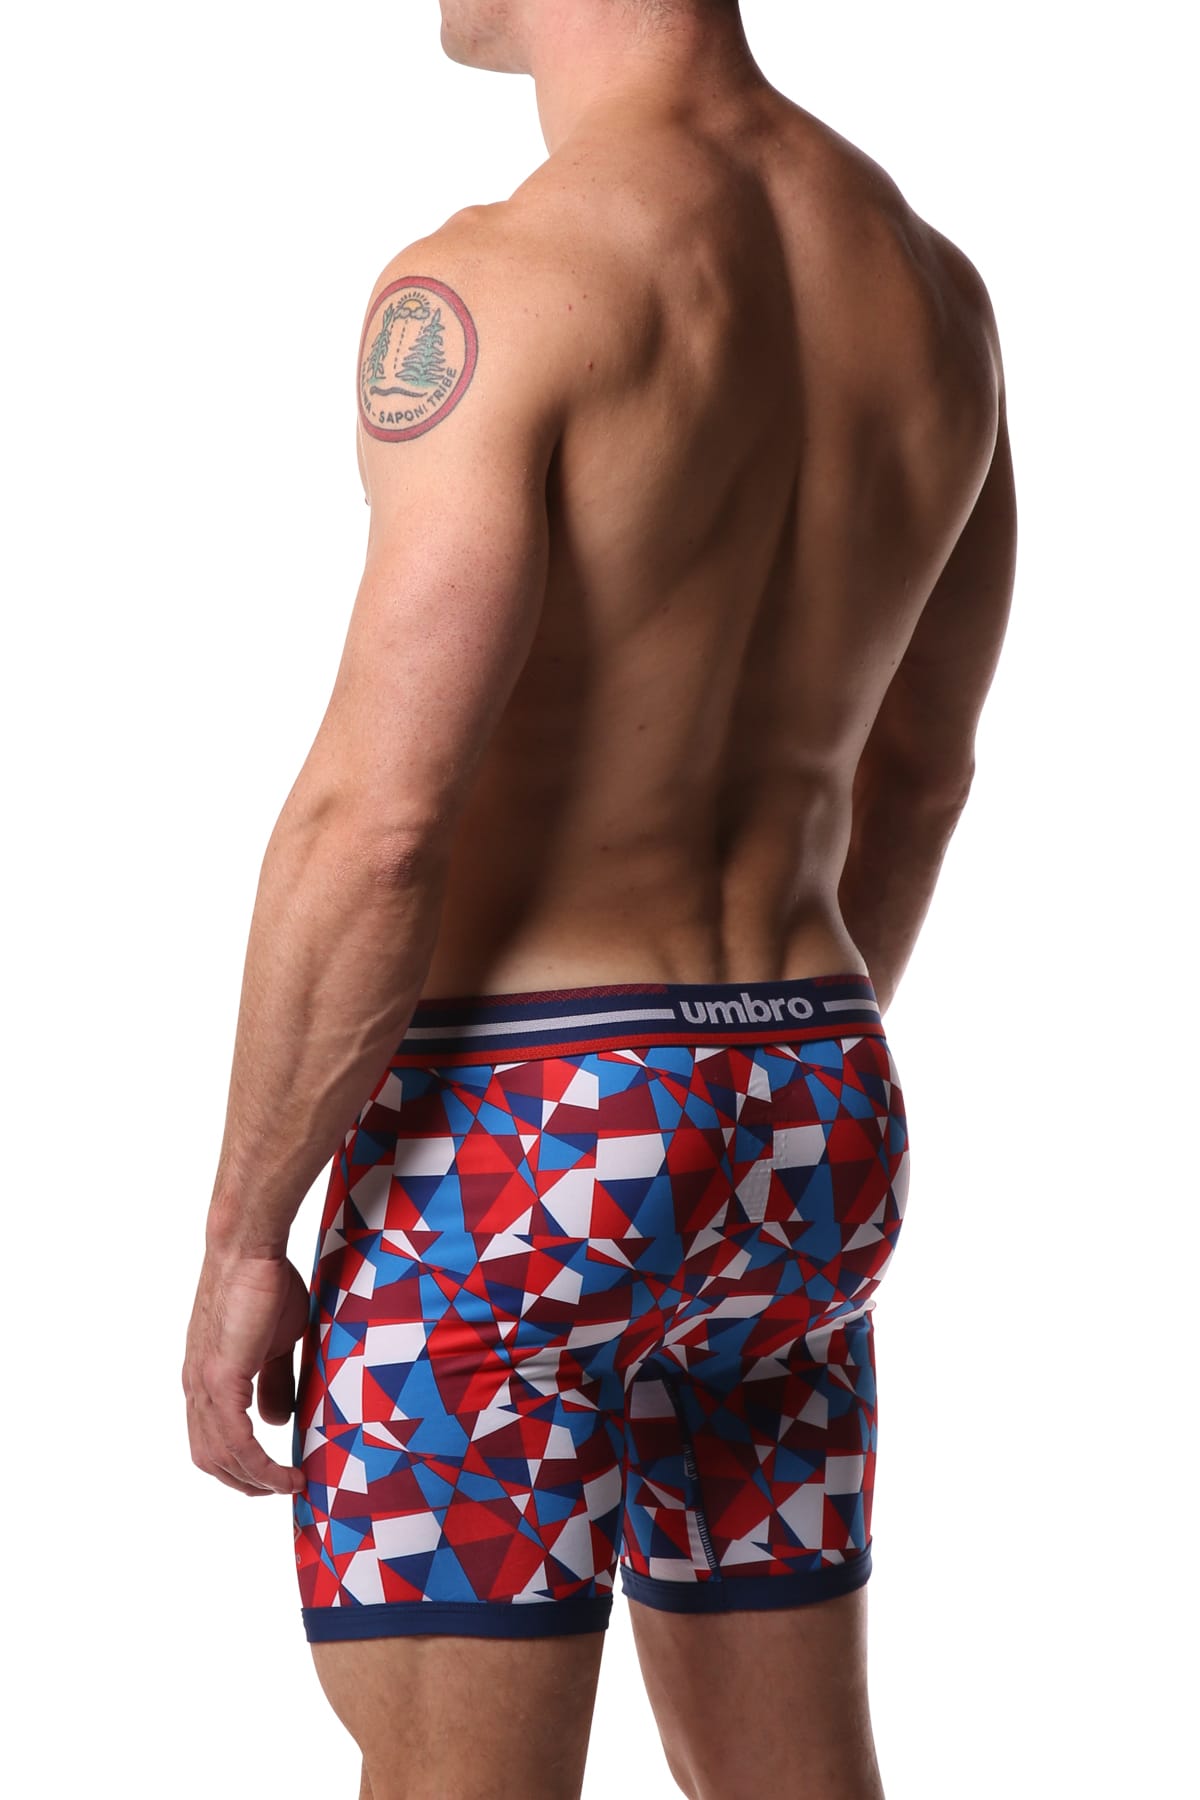 Umbro Red/White/Blue Geometric Shapes Performance Boxer Brief